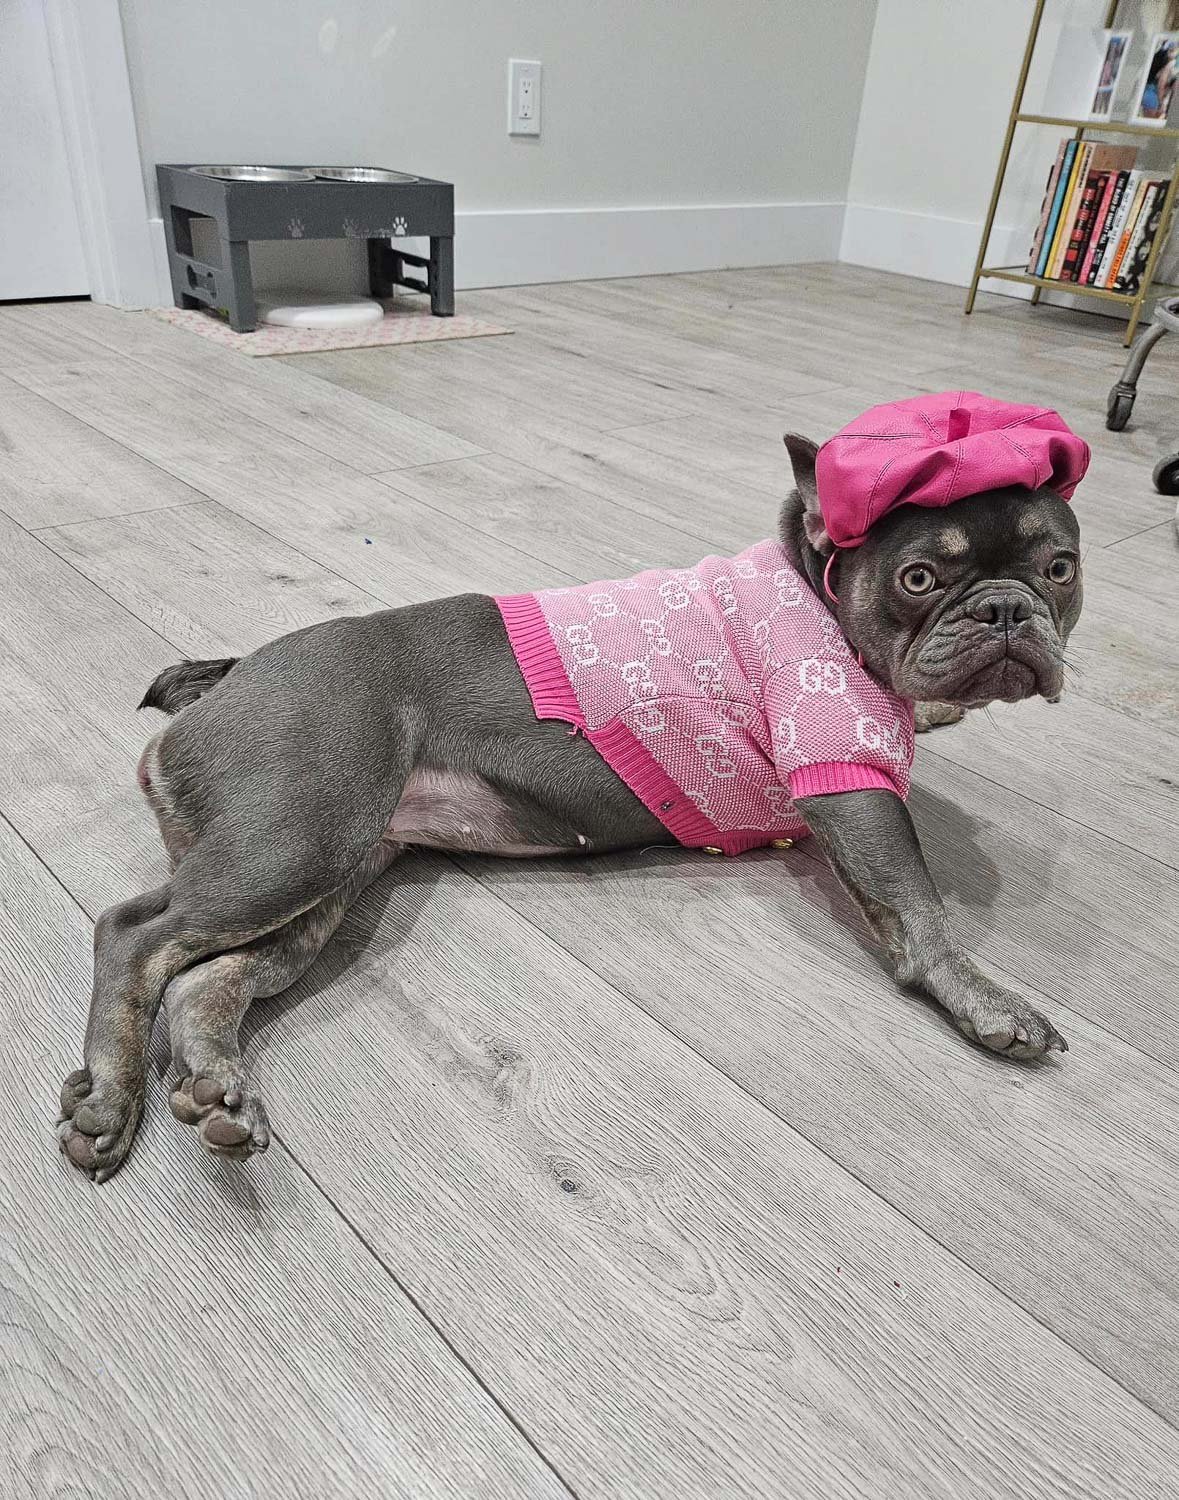 A grey pug dog lying on the floor wearing a pink top and beret